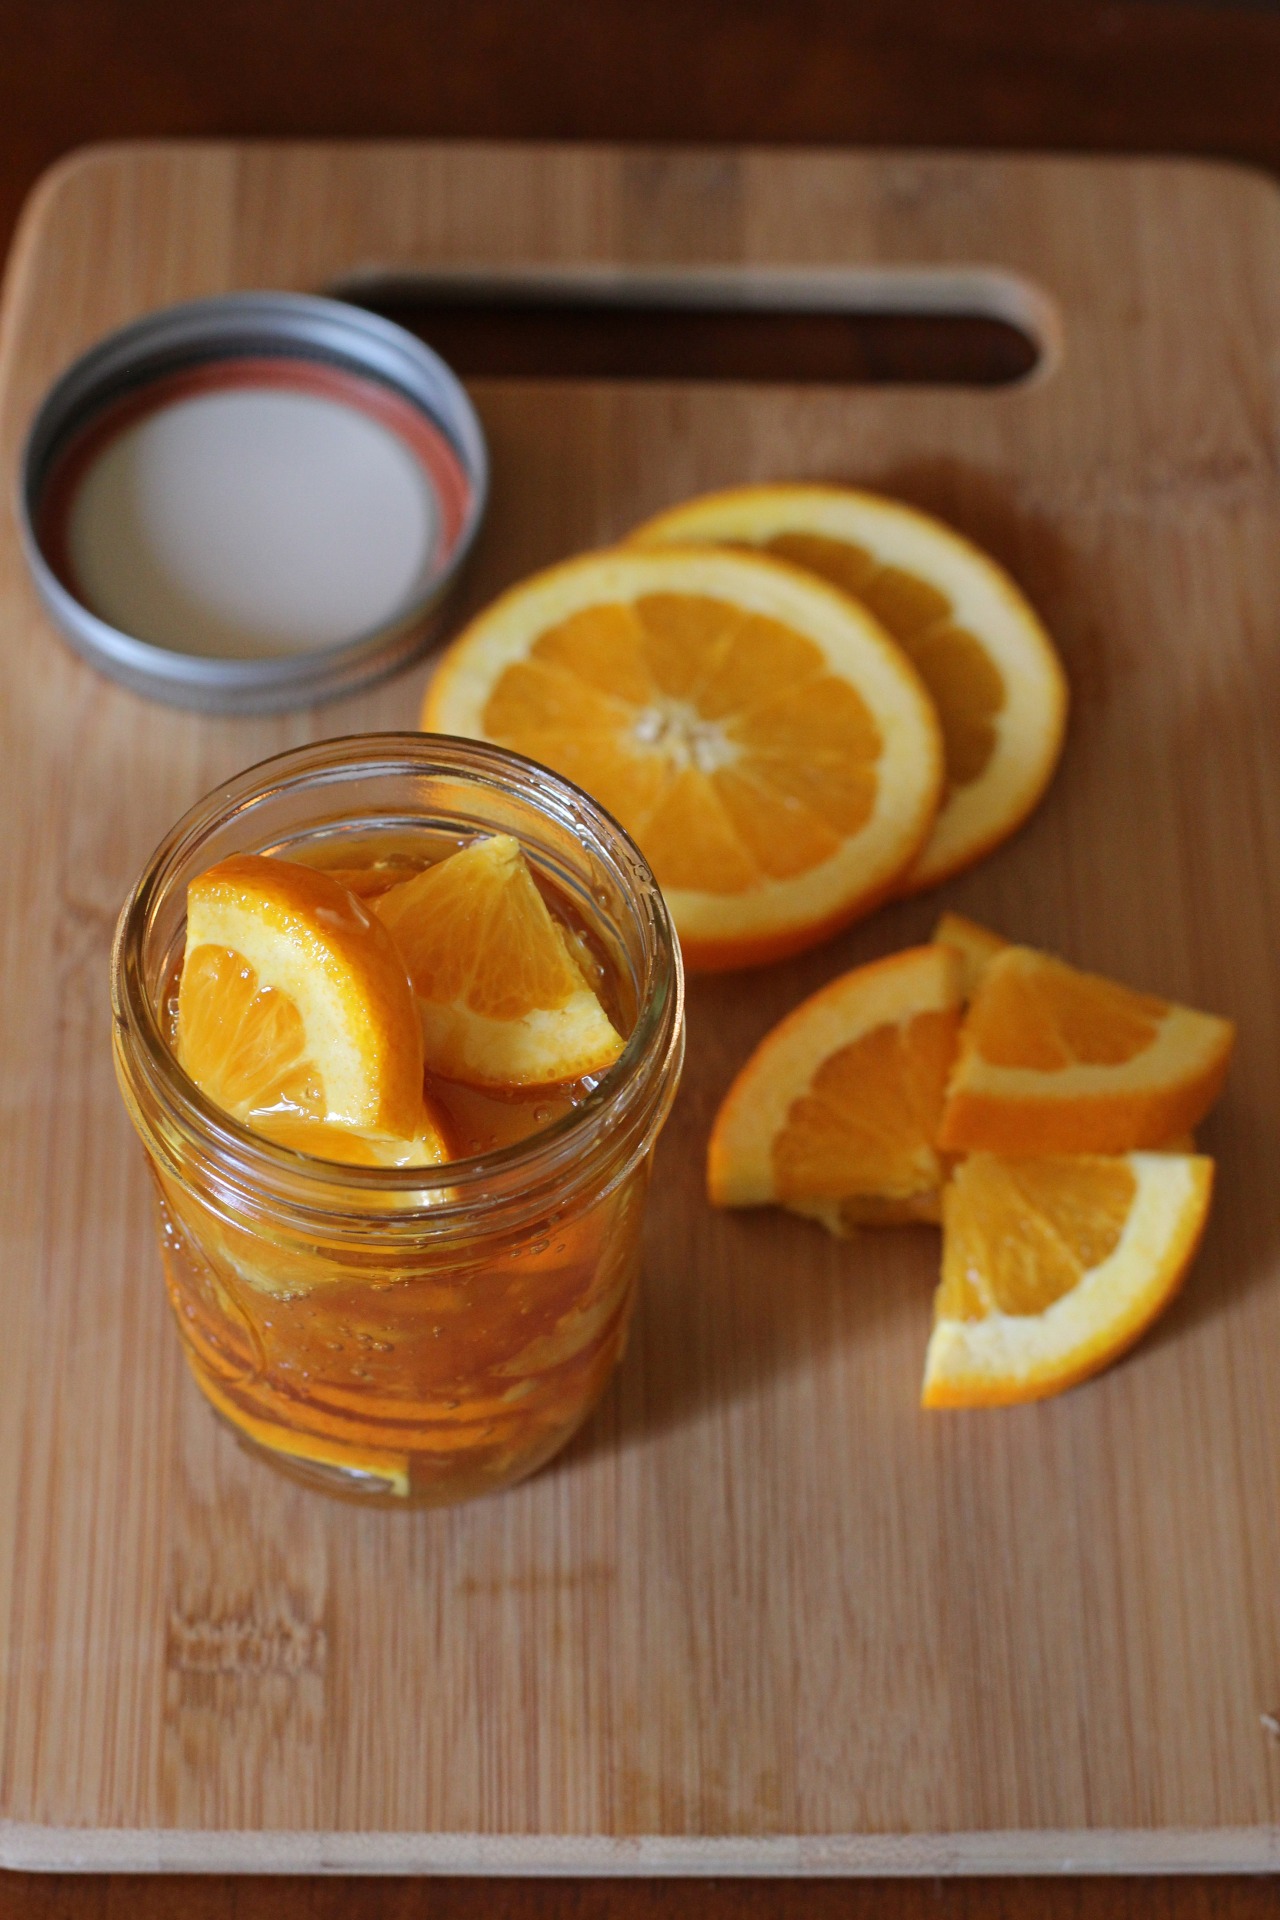 DIY Home Remedy: Orange Ginger Honey Syrup  
Honey syrups have long been a home remedy to sooth a cough or sore throat. This syrup has a pleasant flavor than can be taken by the spoonful straight from the jar, or mixed into hot water or hot tea for a comforting drink when you are feeling under the weather.
SERVINGS: About 40 teaspoons
TIME TO TABLE:4 hours prep
INGREDIENTS:1 Paramount Citrus orange, sliced and quartered½ teaspoon freshly grated ginger½ to ¾ cup locally-produced raw honey
PREPARATION
1. Place the orange pieces in a pint jar, pressing firmly to fit them all in. Add the ginger to the jar.
2. Pour the honey into the jar. Use a spoon or chopstick to gently move around the orange pieces to allow the honey to fill the jar. Use enough honey to fill the jar within &frac12; inch of the top.
3. Place the lid on the jar and transfer to the refrigerator for storage.
4. The syrup is ready in about 4 hours and it will keep up to 1 month. 